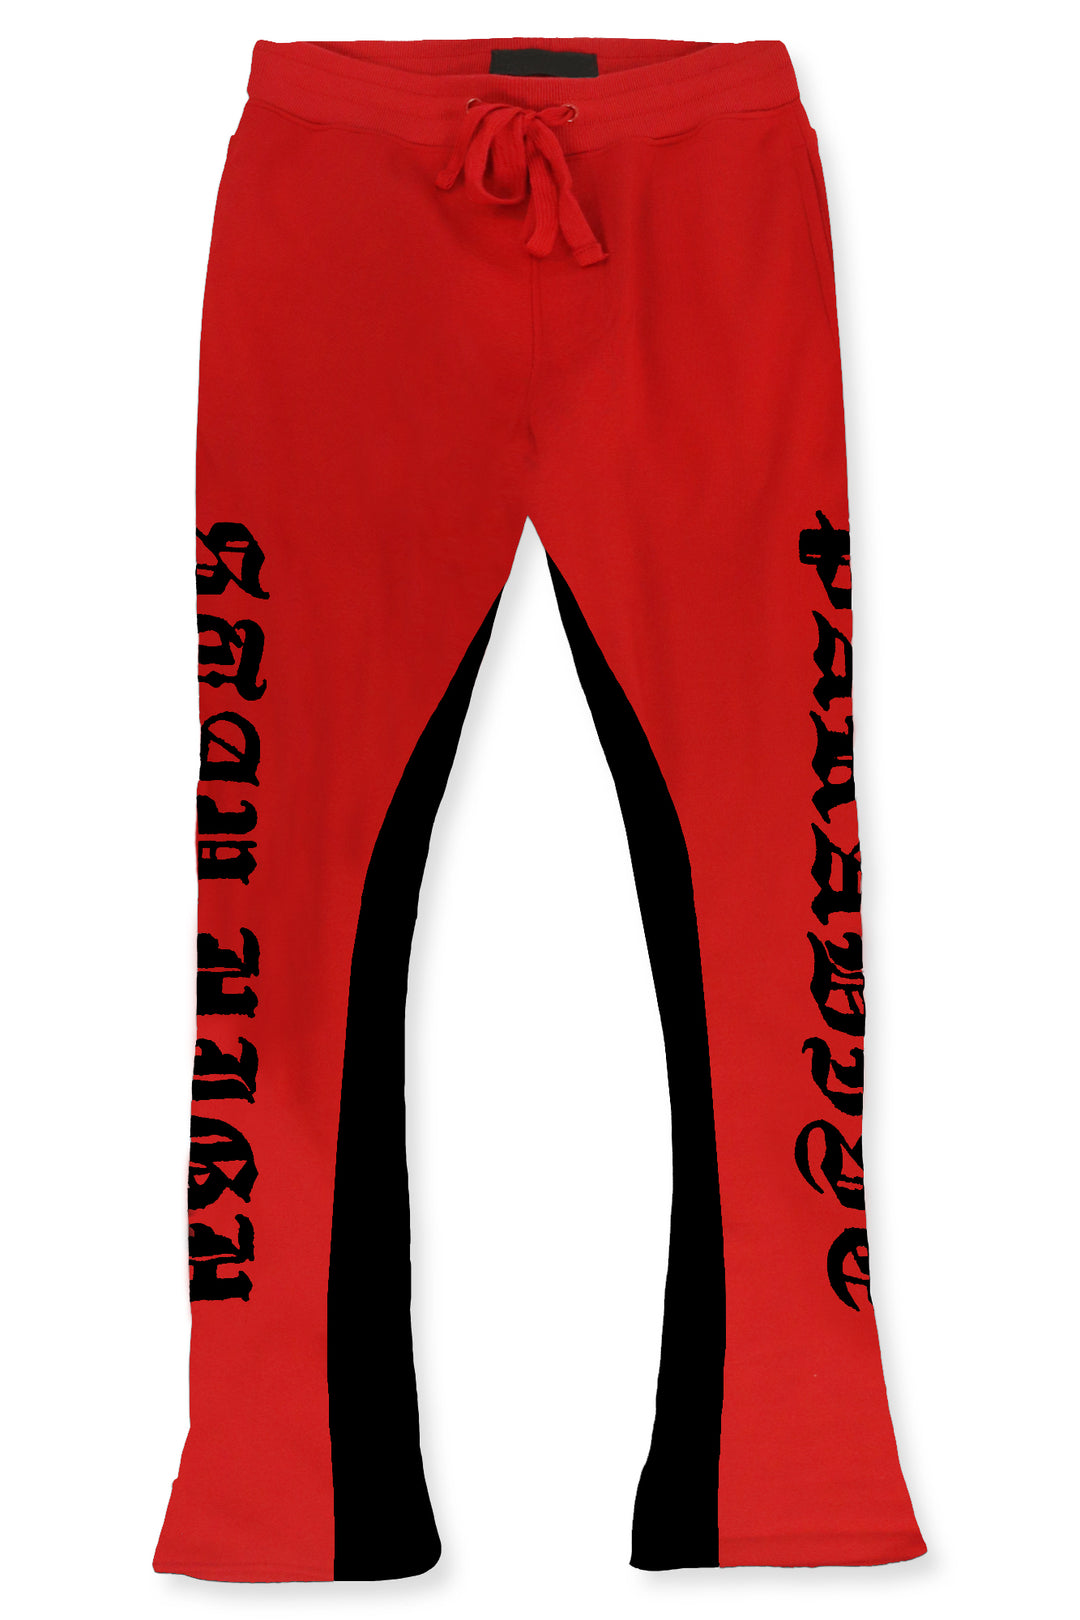 Stay High Paradise Fleece Stacked Pant (Red) (132-498) - Zamage